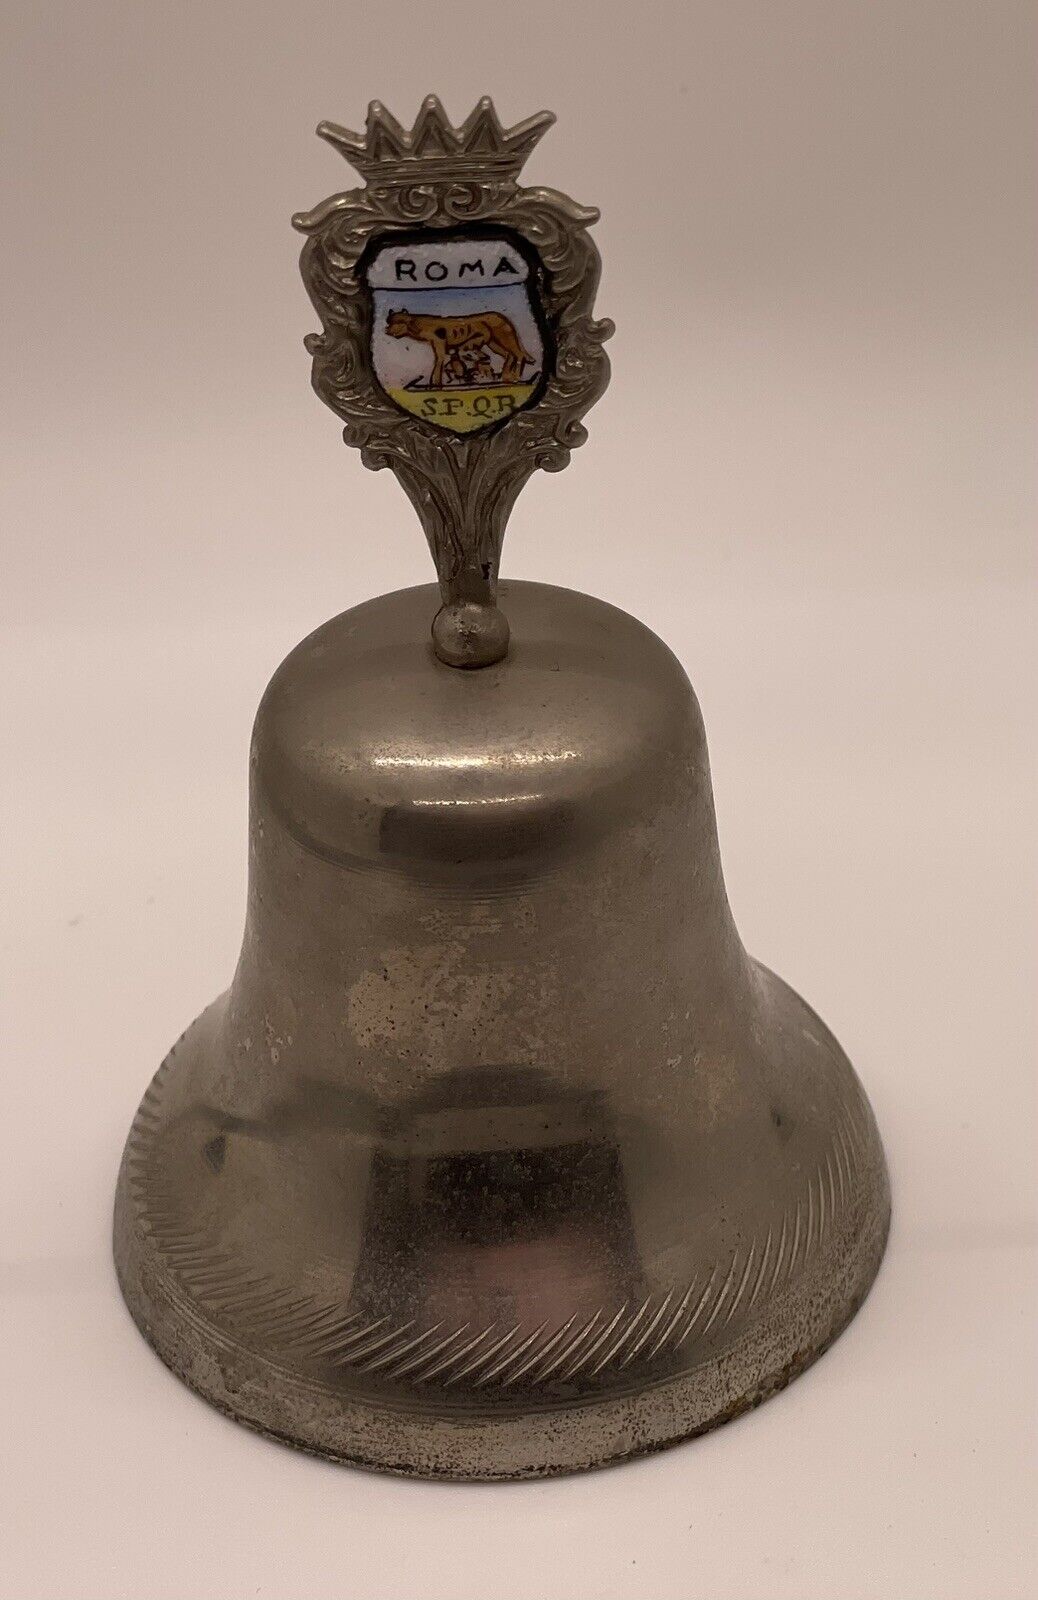 Roma Souvenir Bell Small Metal Vintage 1970s ( Underside of Bell Has Rust) 70s